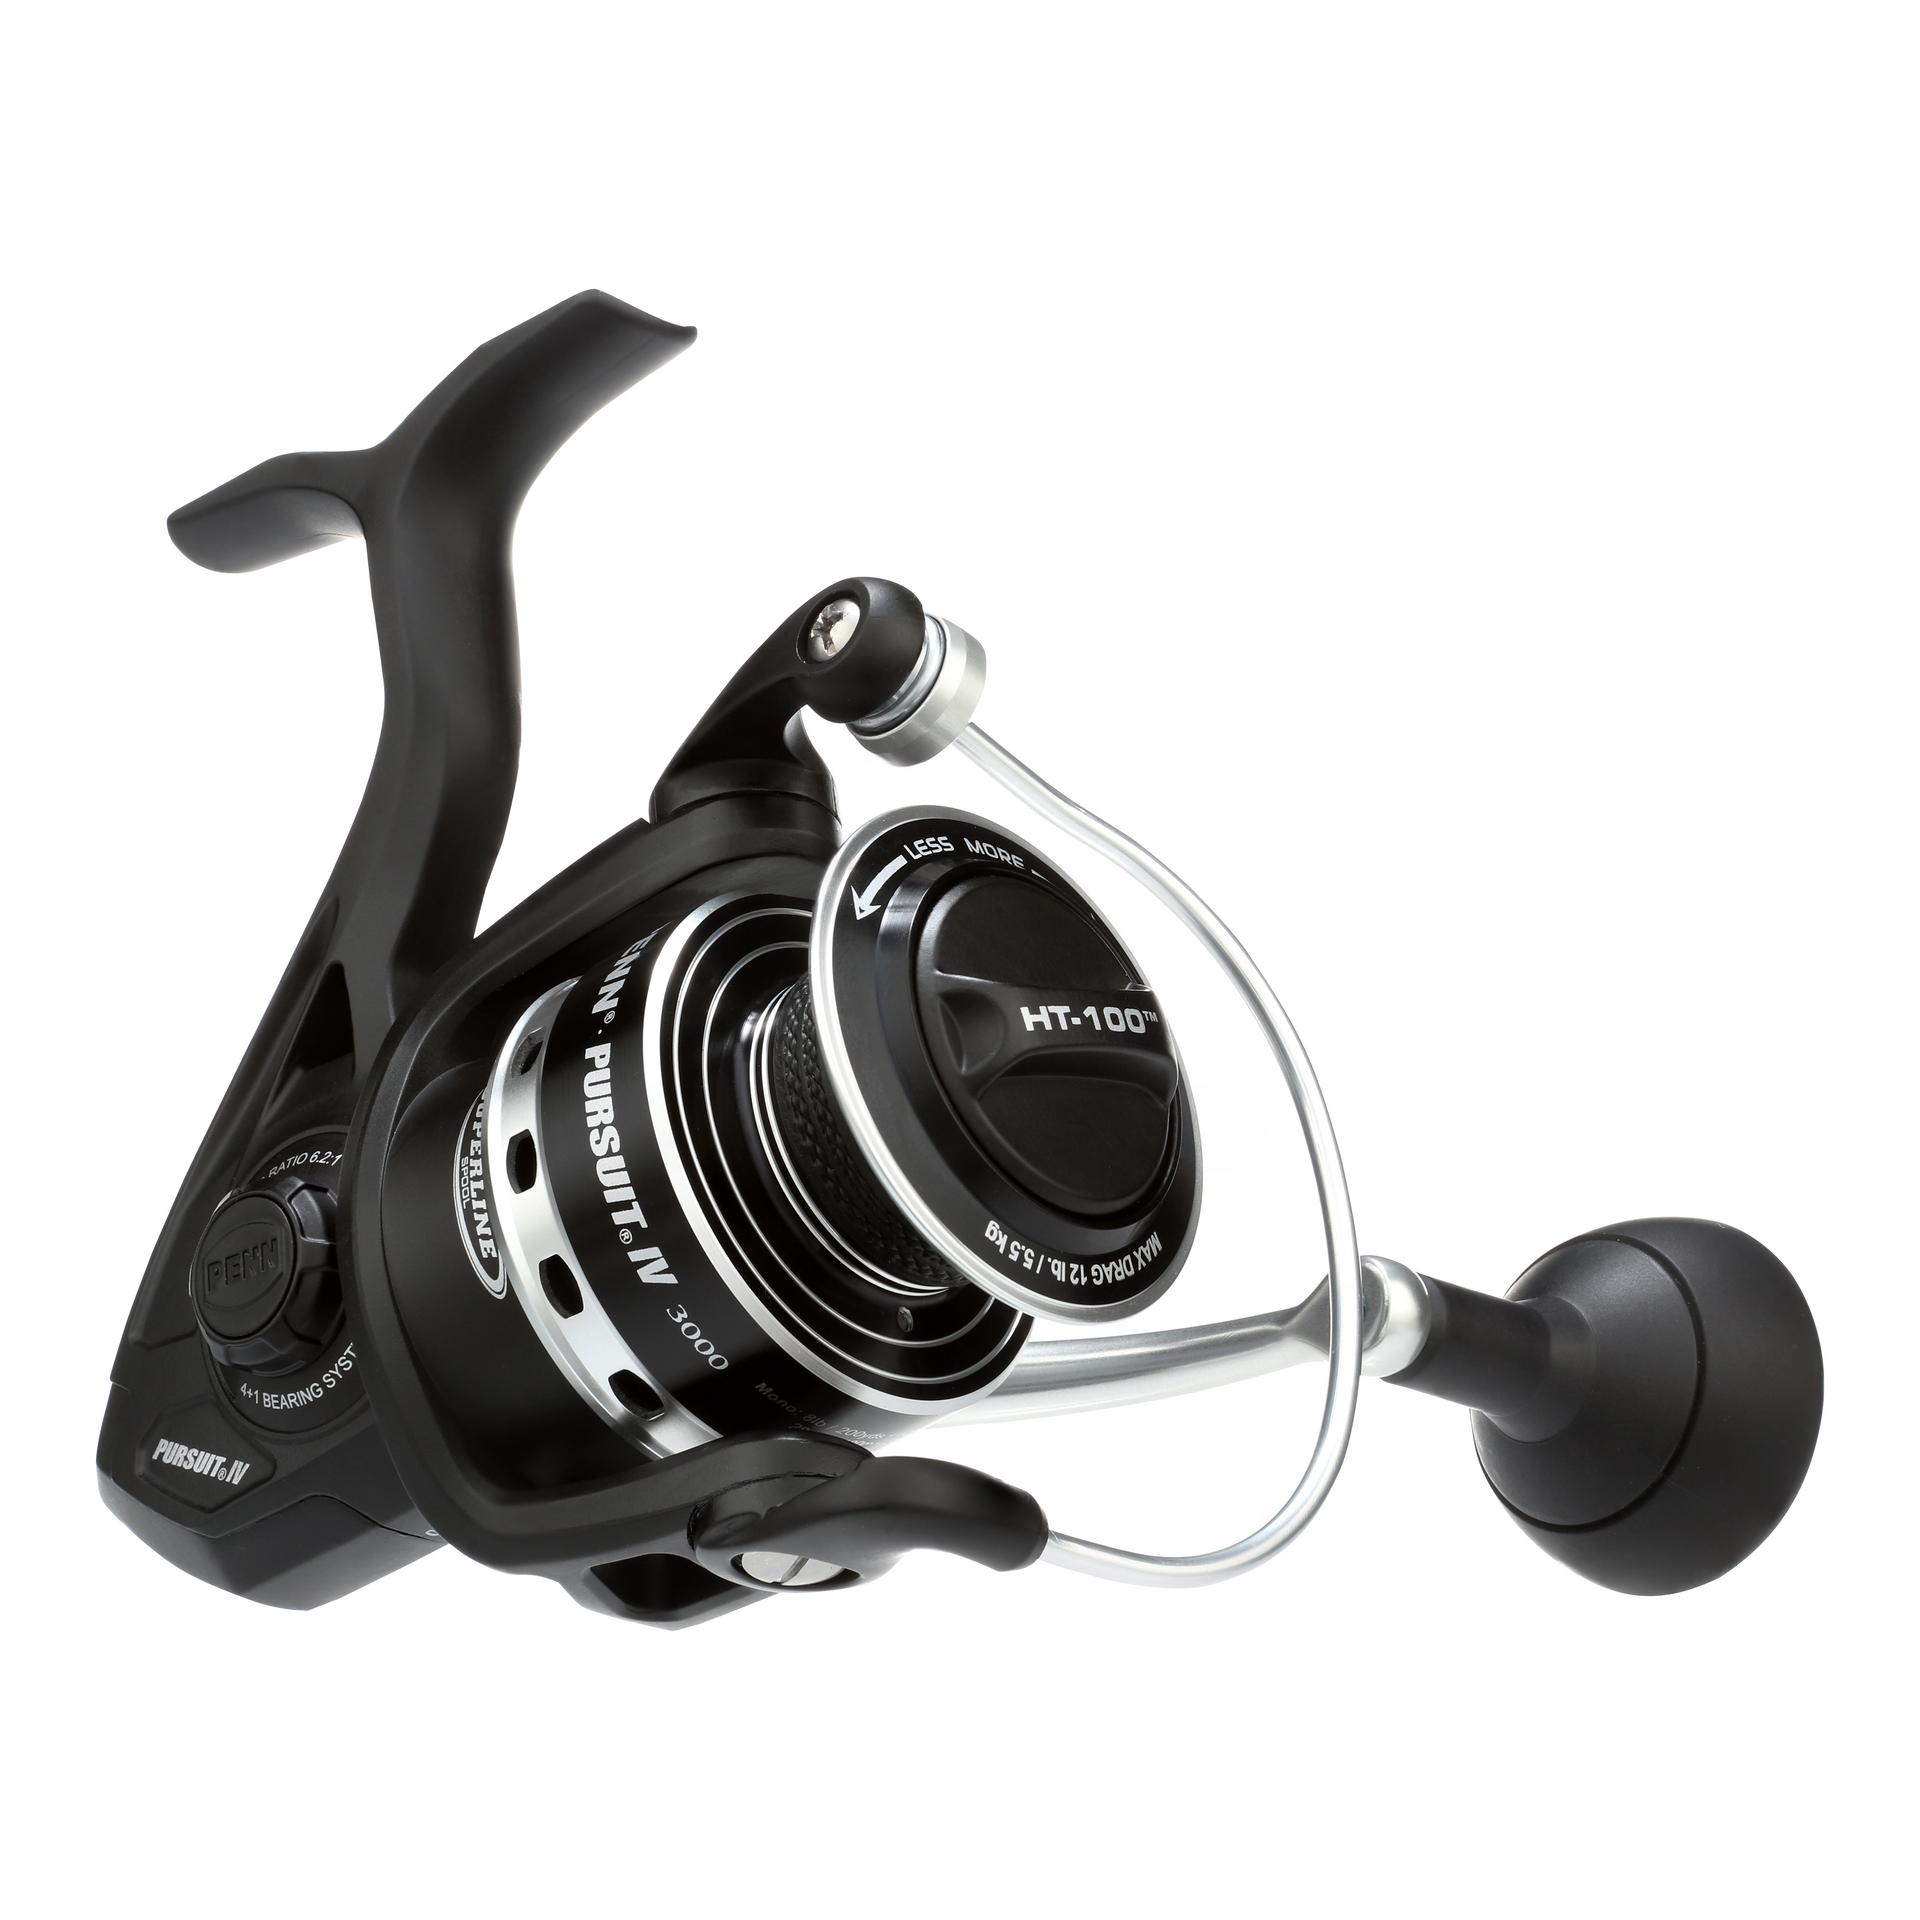  PENN Spinfisher VI Spinning Surf Fishing Reel, HT-100 Front  Drag, Max Of 20lb 9.0kg, Made